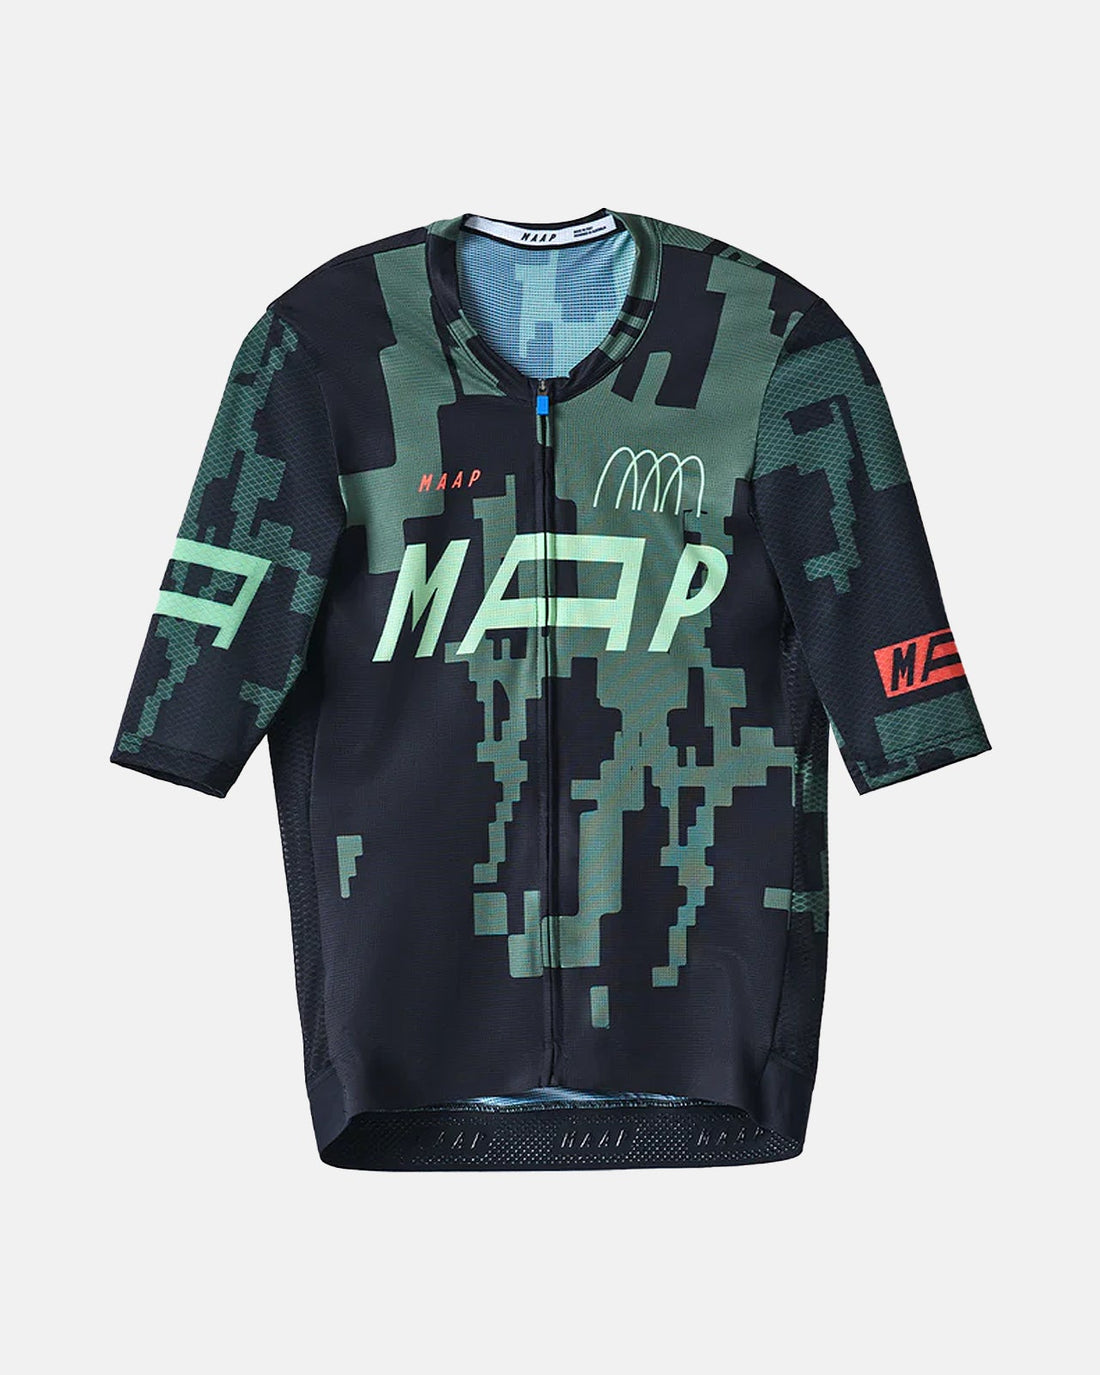 Adapted F.0 Pro Air Jersey 2.0 - Black